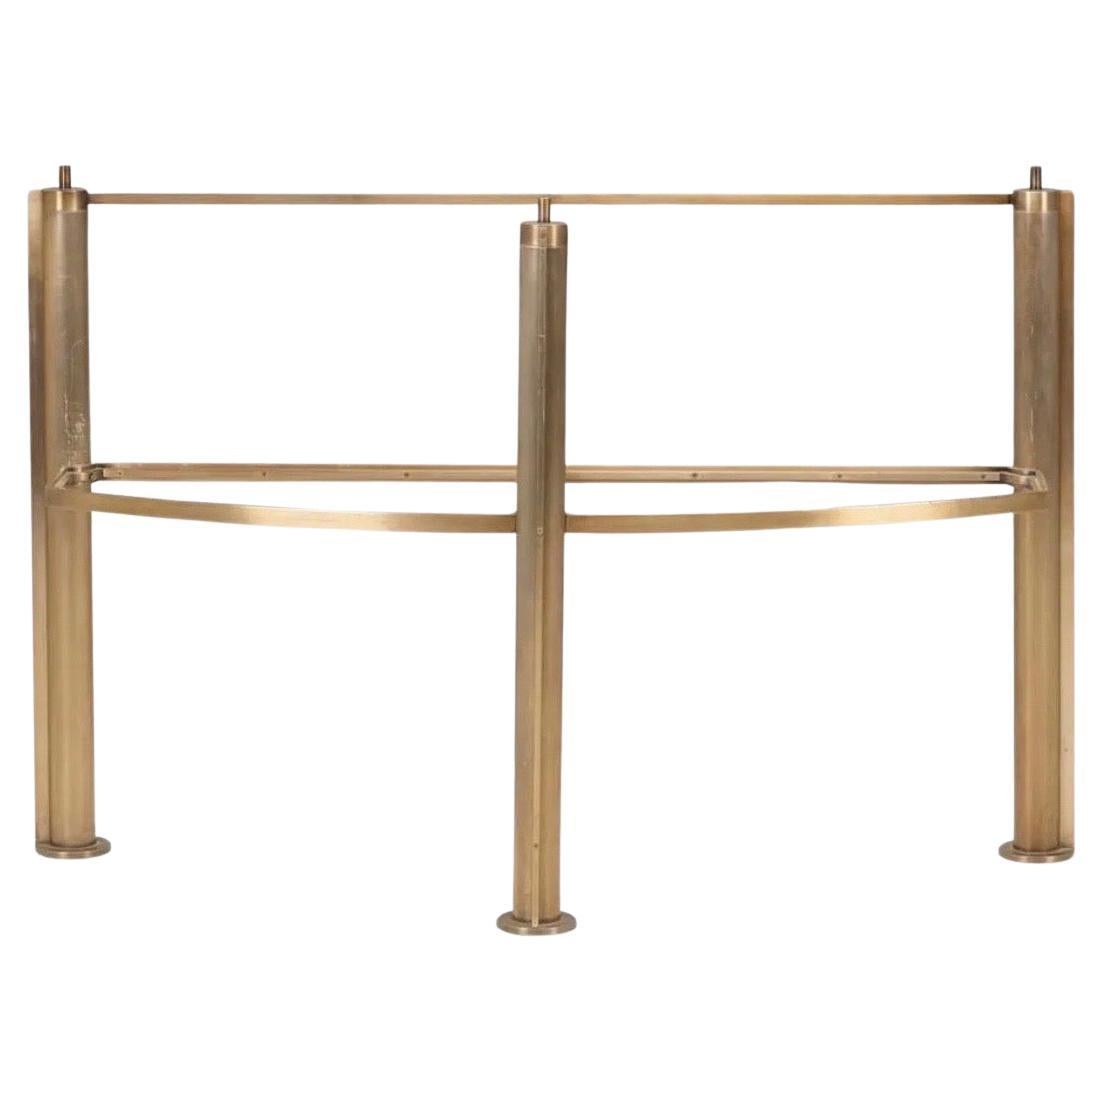 Jean-Michel Wilmotte Flag Console Postmodern Metal Table, France, 1980s. For Sale